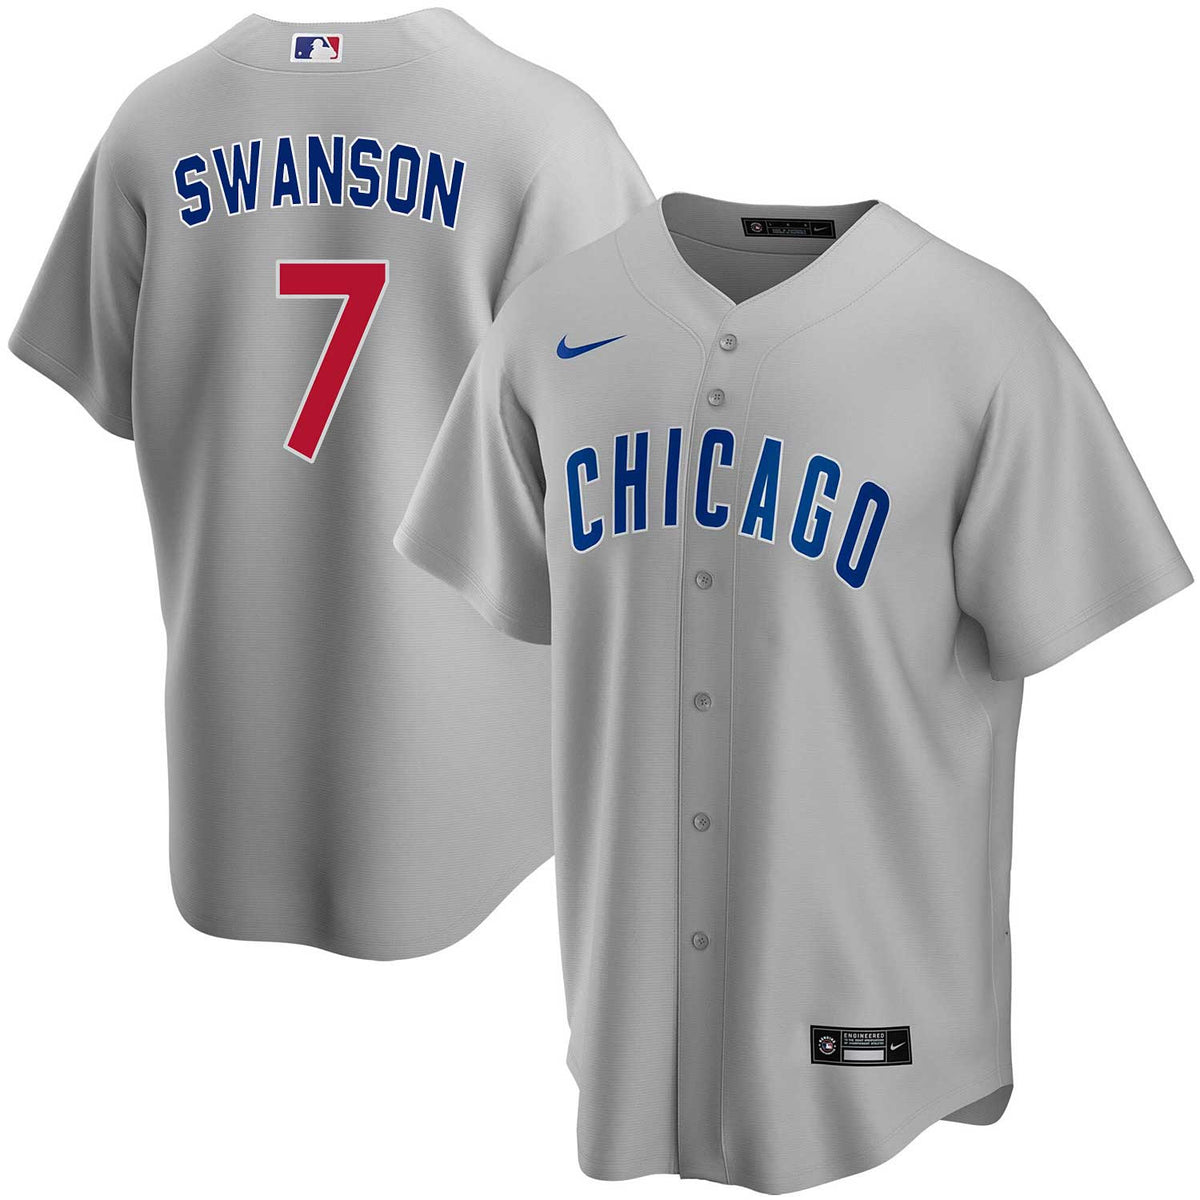 Official Dansby Swanson Jersey, Dansby Swanson Shirts, Baseball